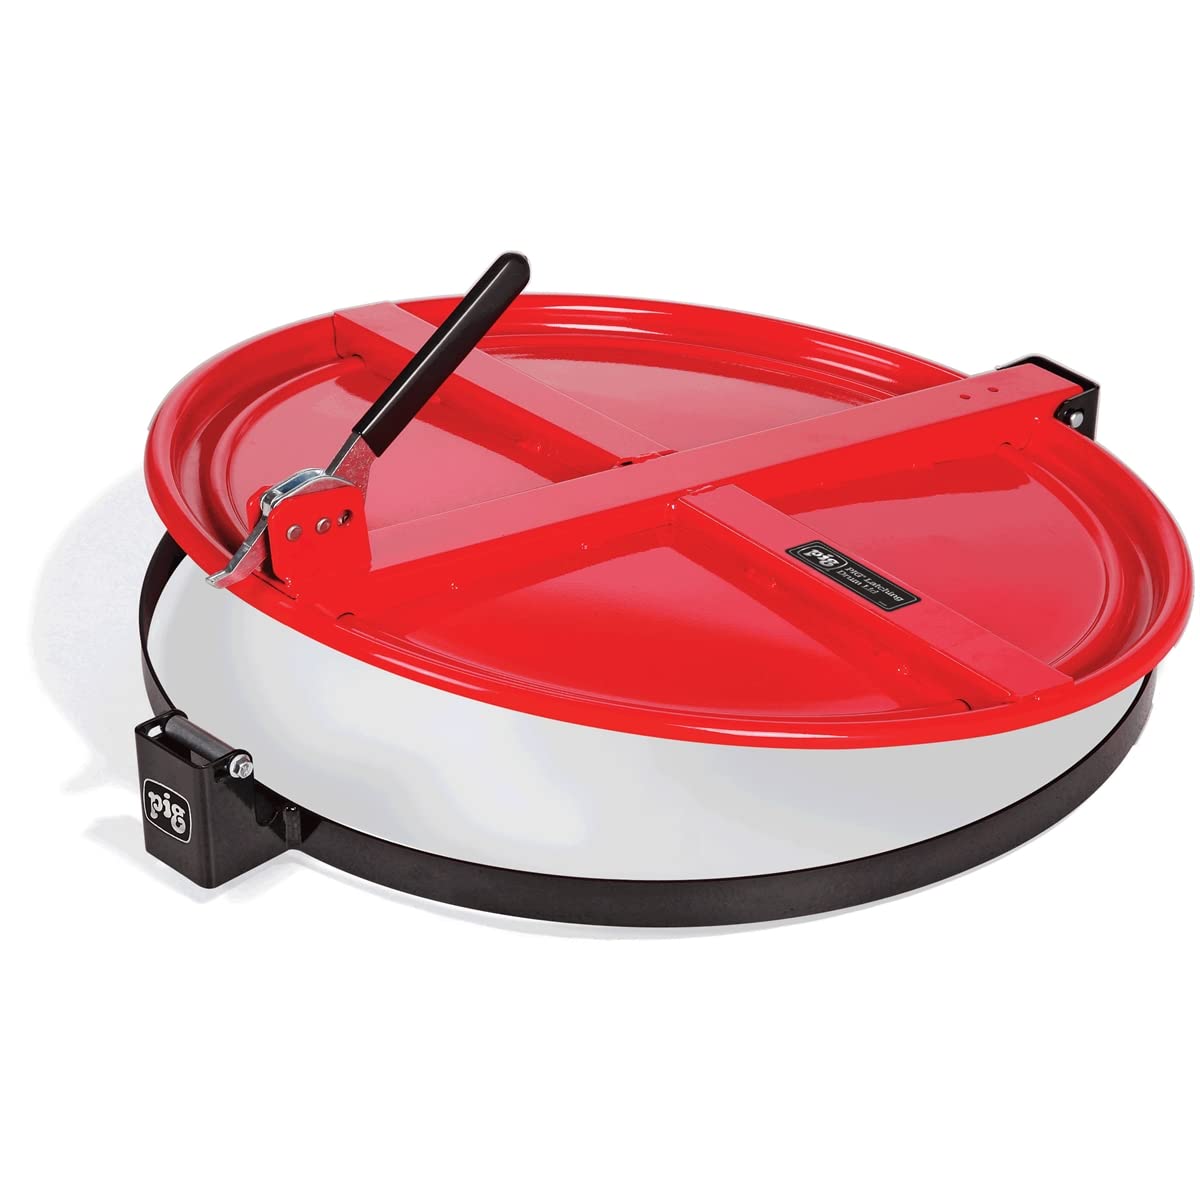 New Pig Corporation DRM659-RD PIGÂ Latching Drum Lid 55 Gallon - Red (8128992575726)